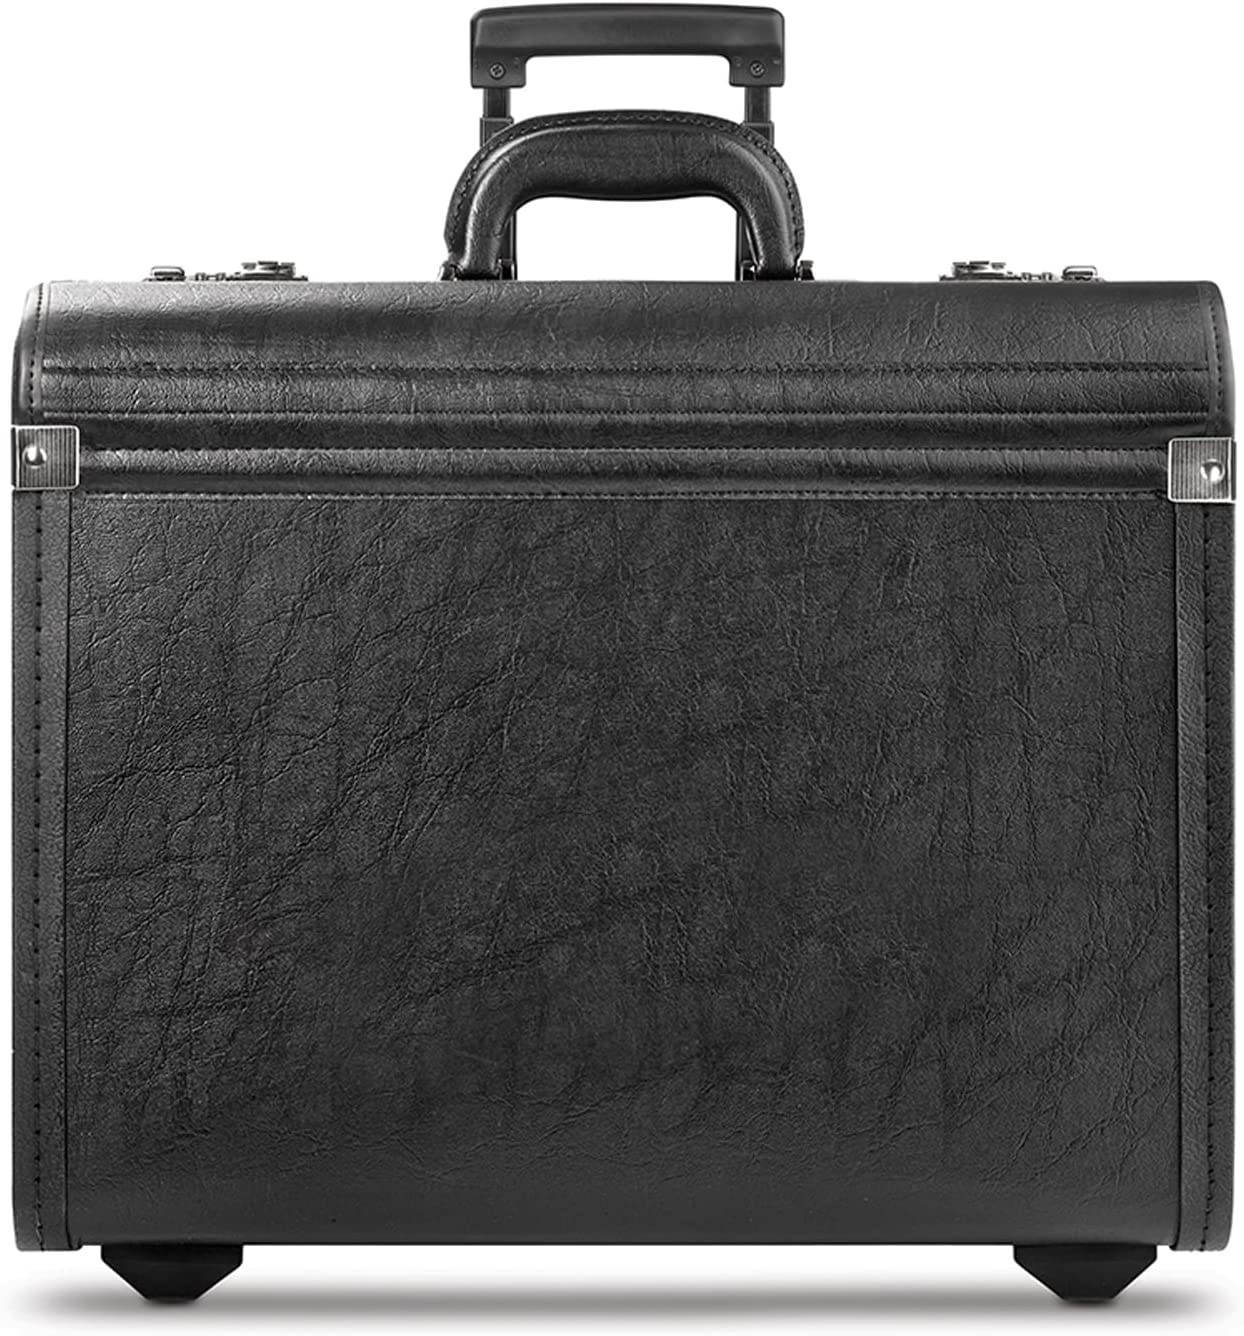 Solo Lincoln Rolling Catalog Case, with Dual Combination Locks